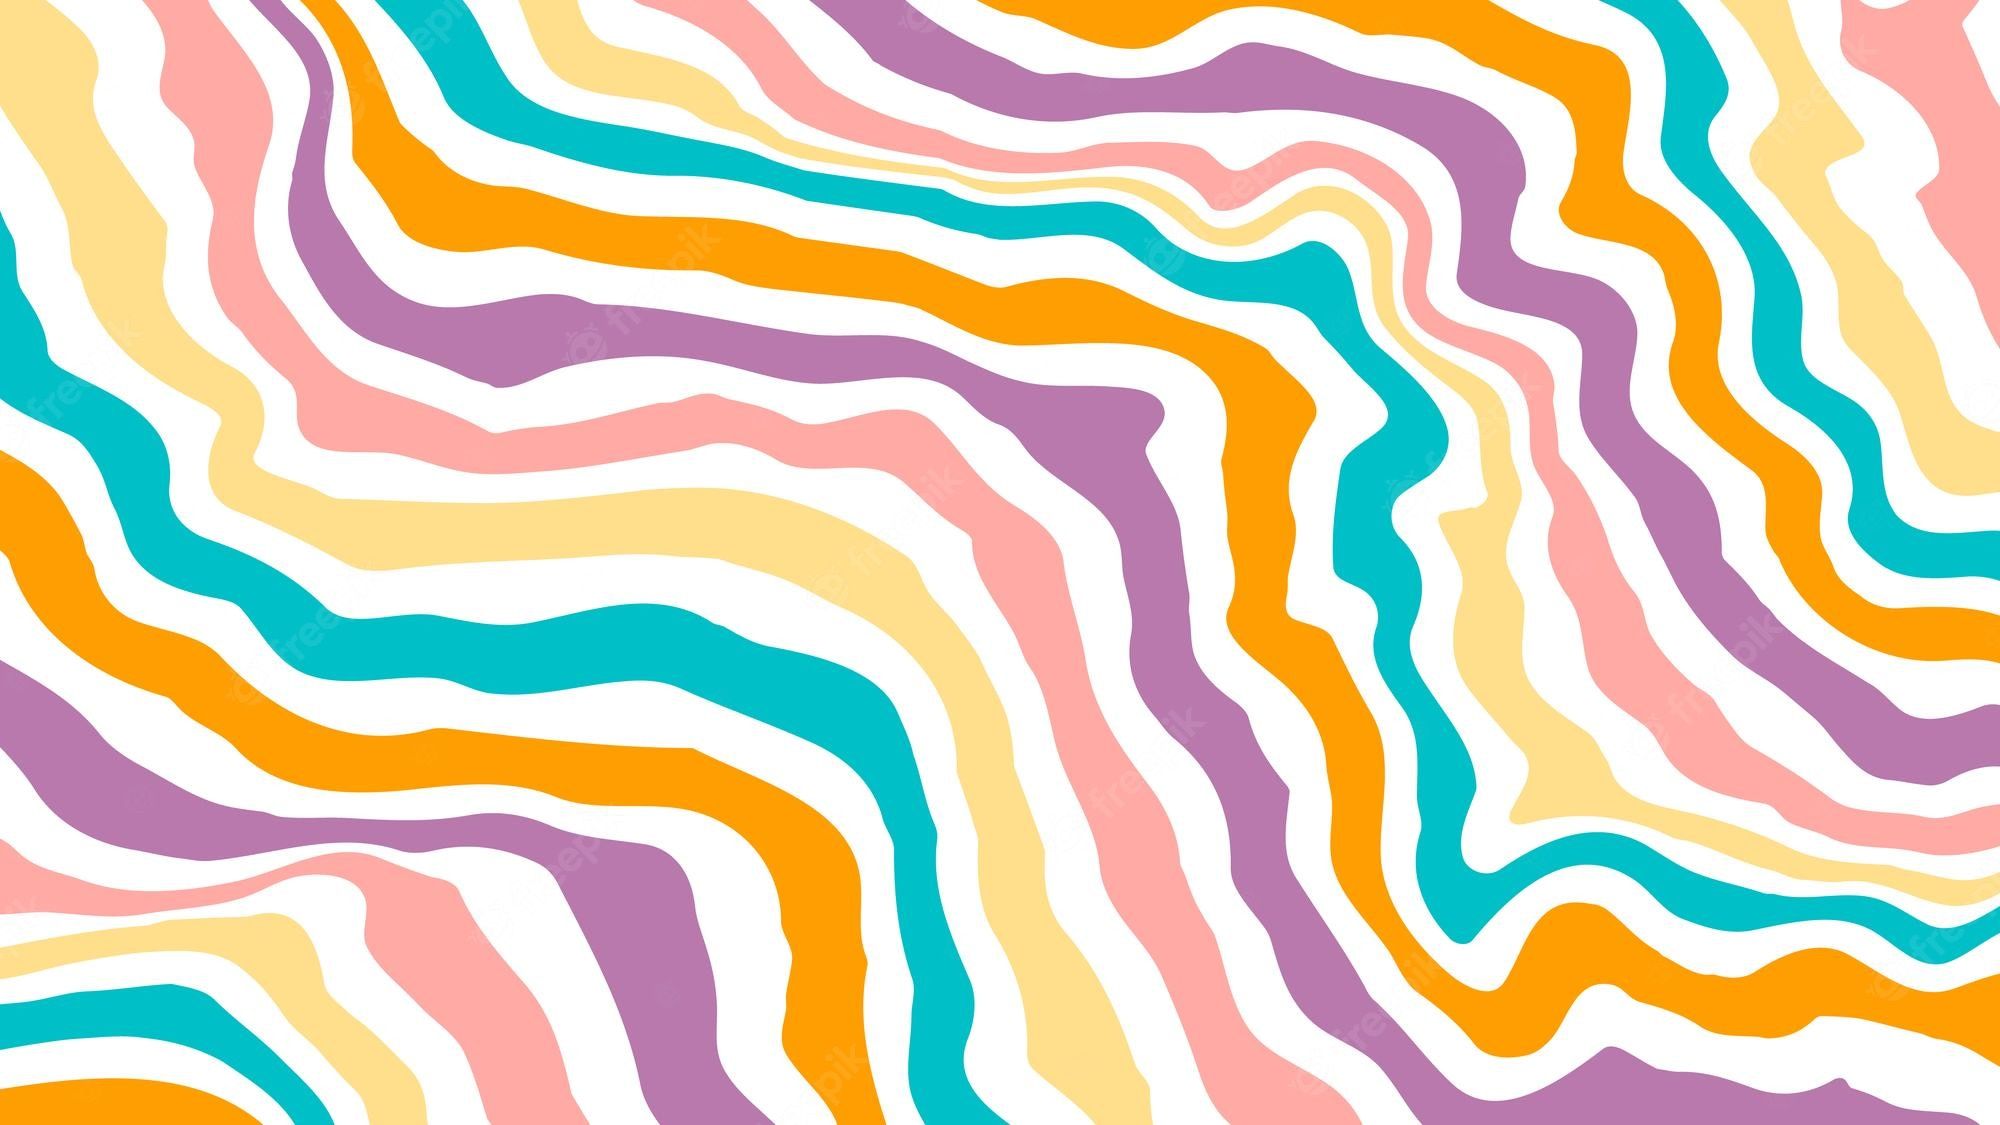 A colorful pattern of waves and lines - 70s